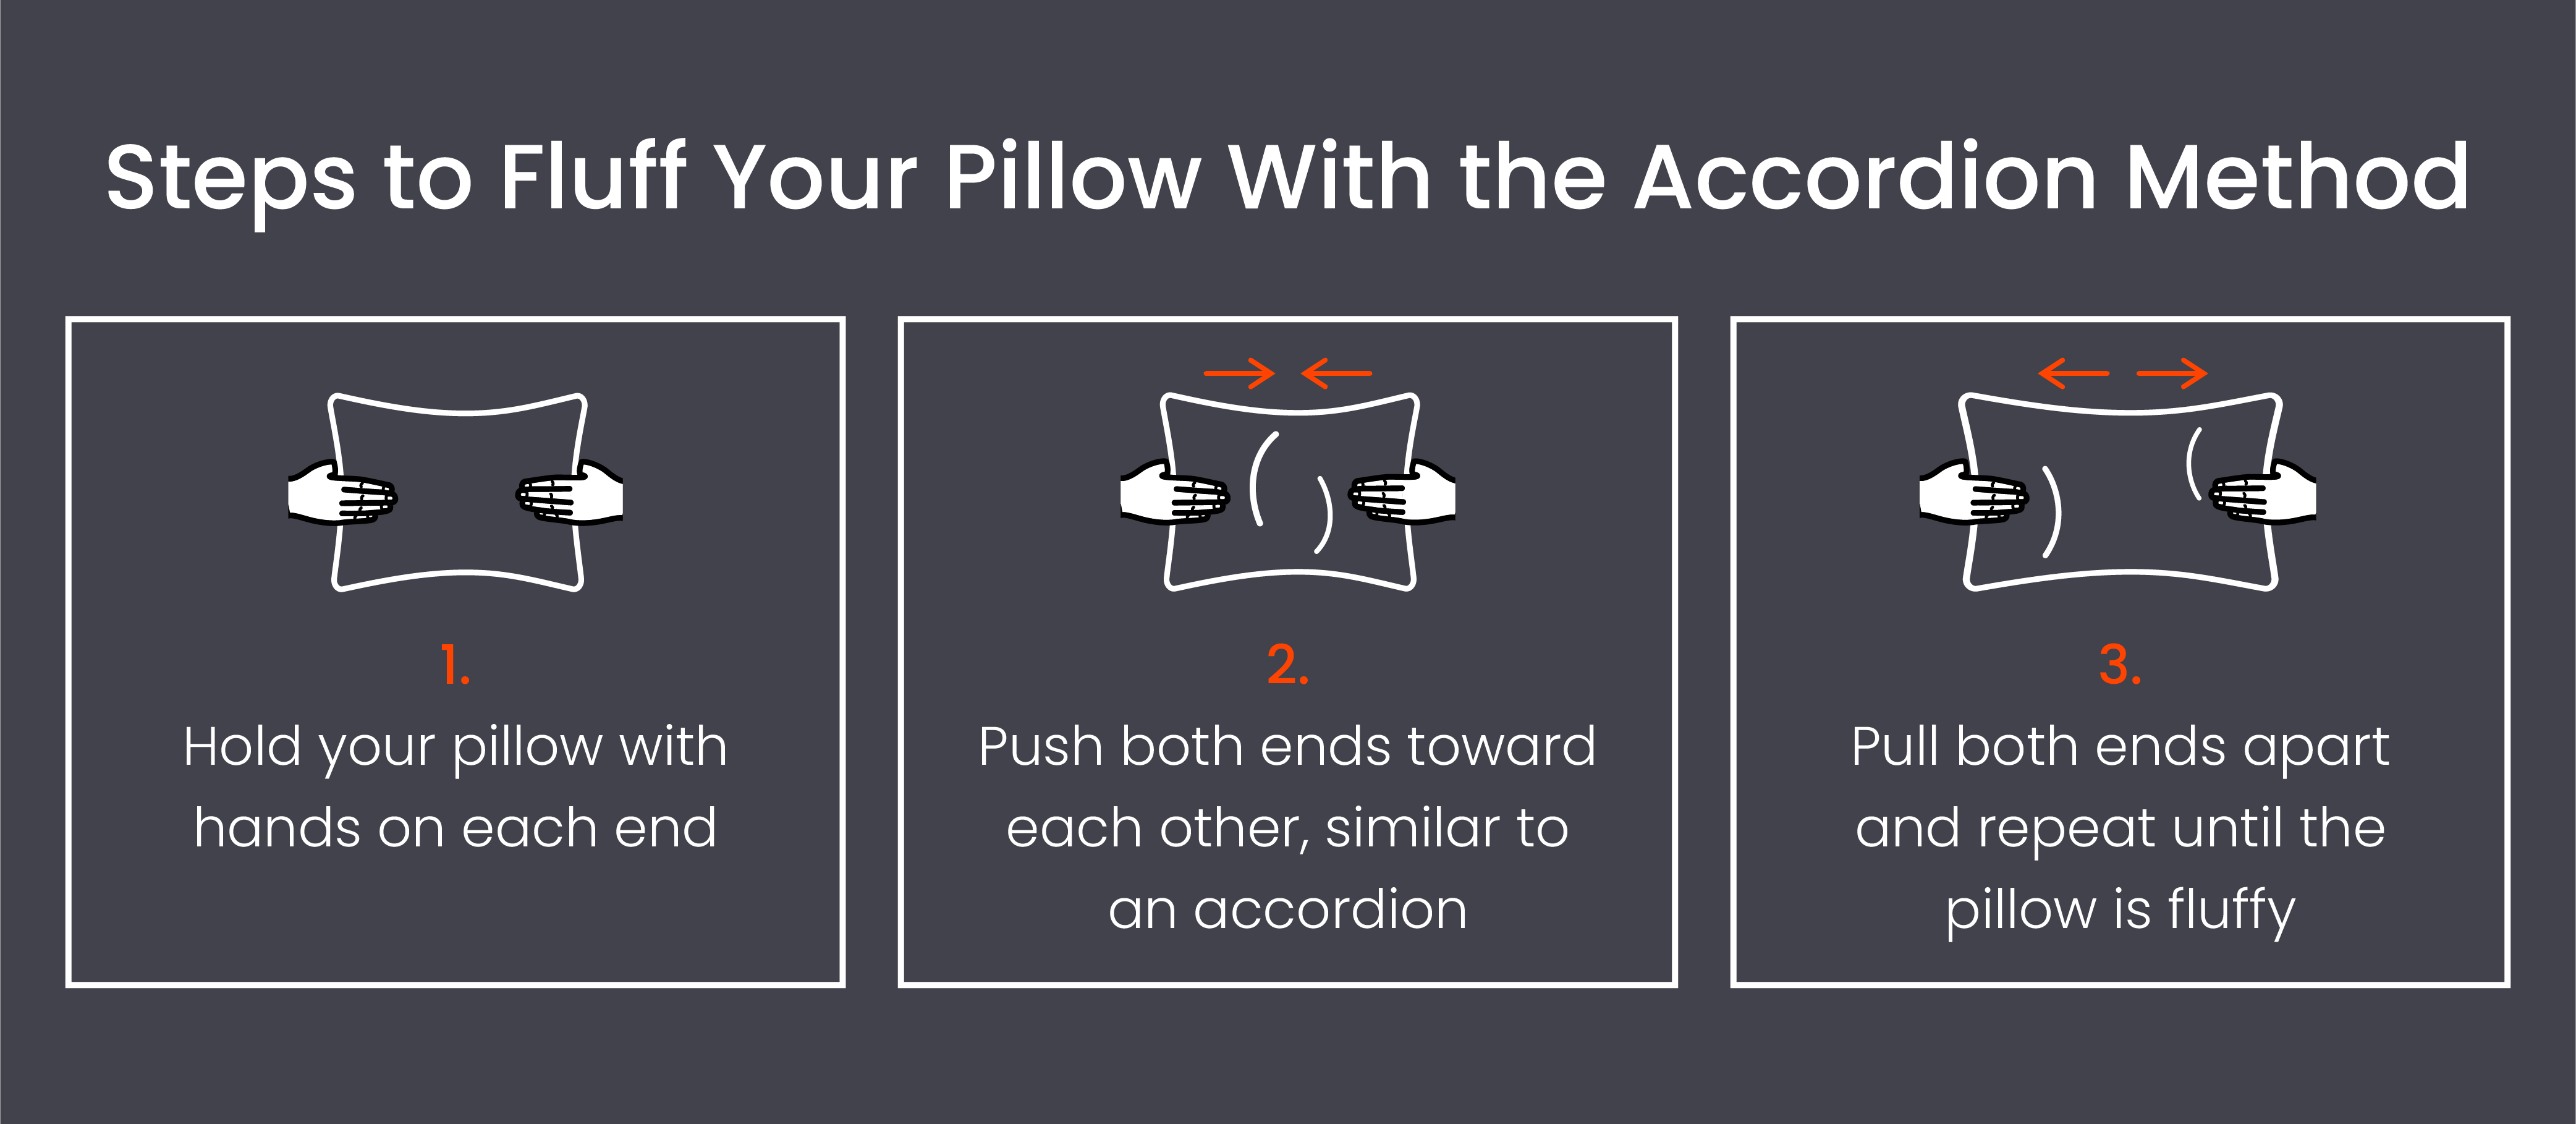 Steps to fluff your pillow with the accordion method